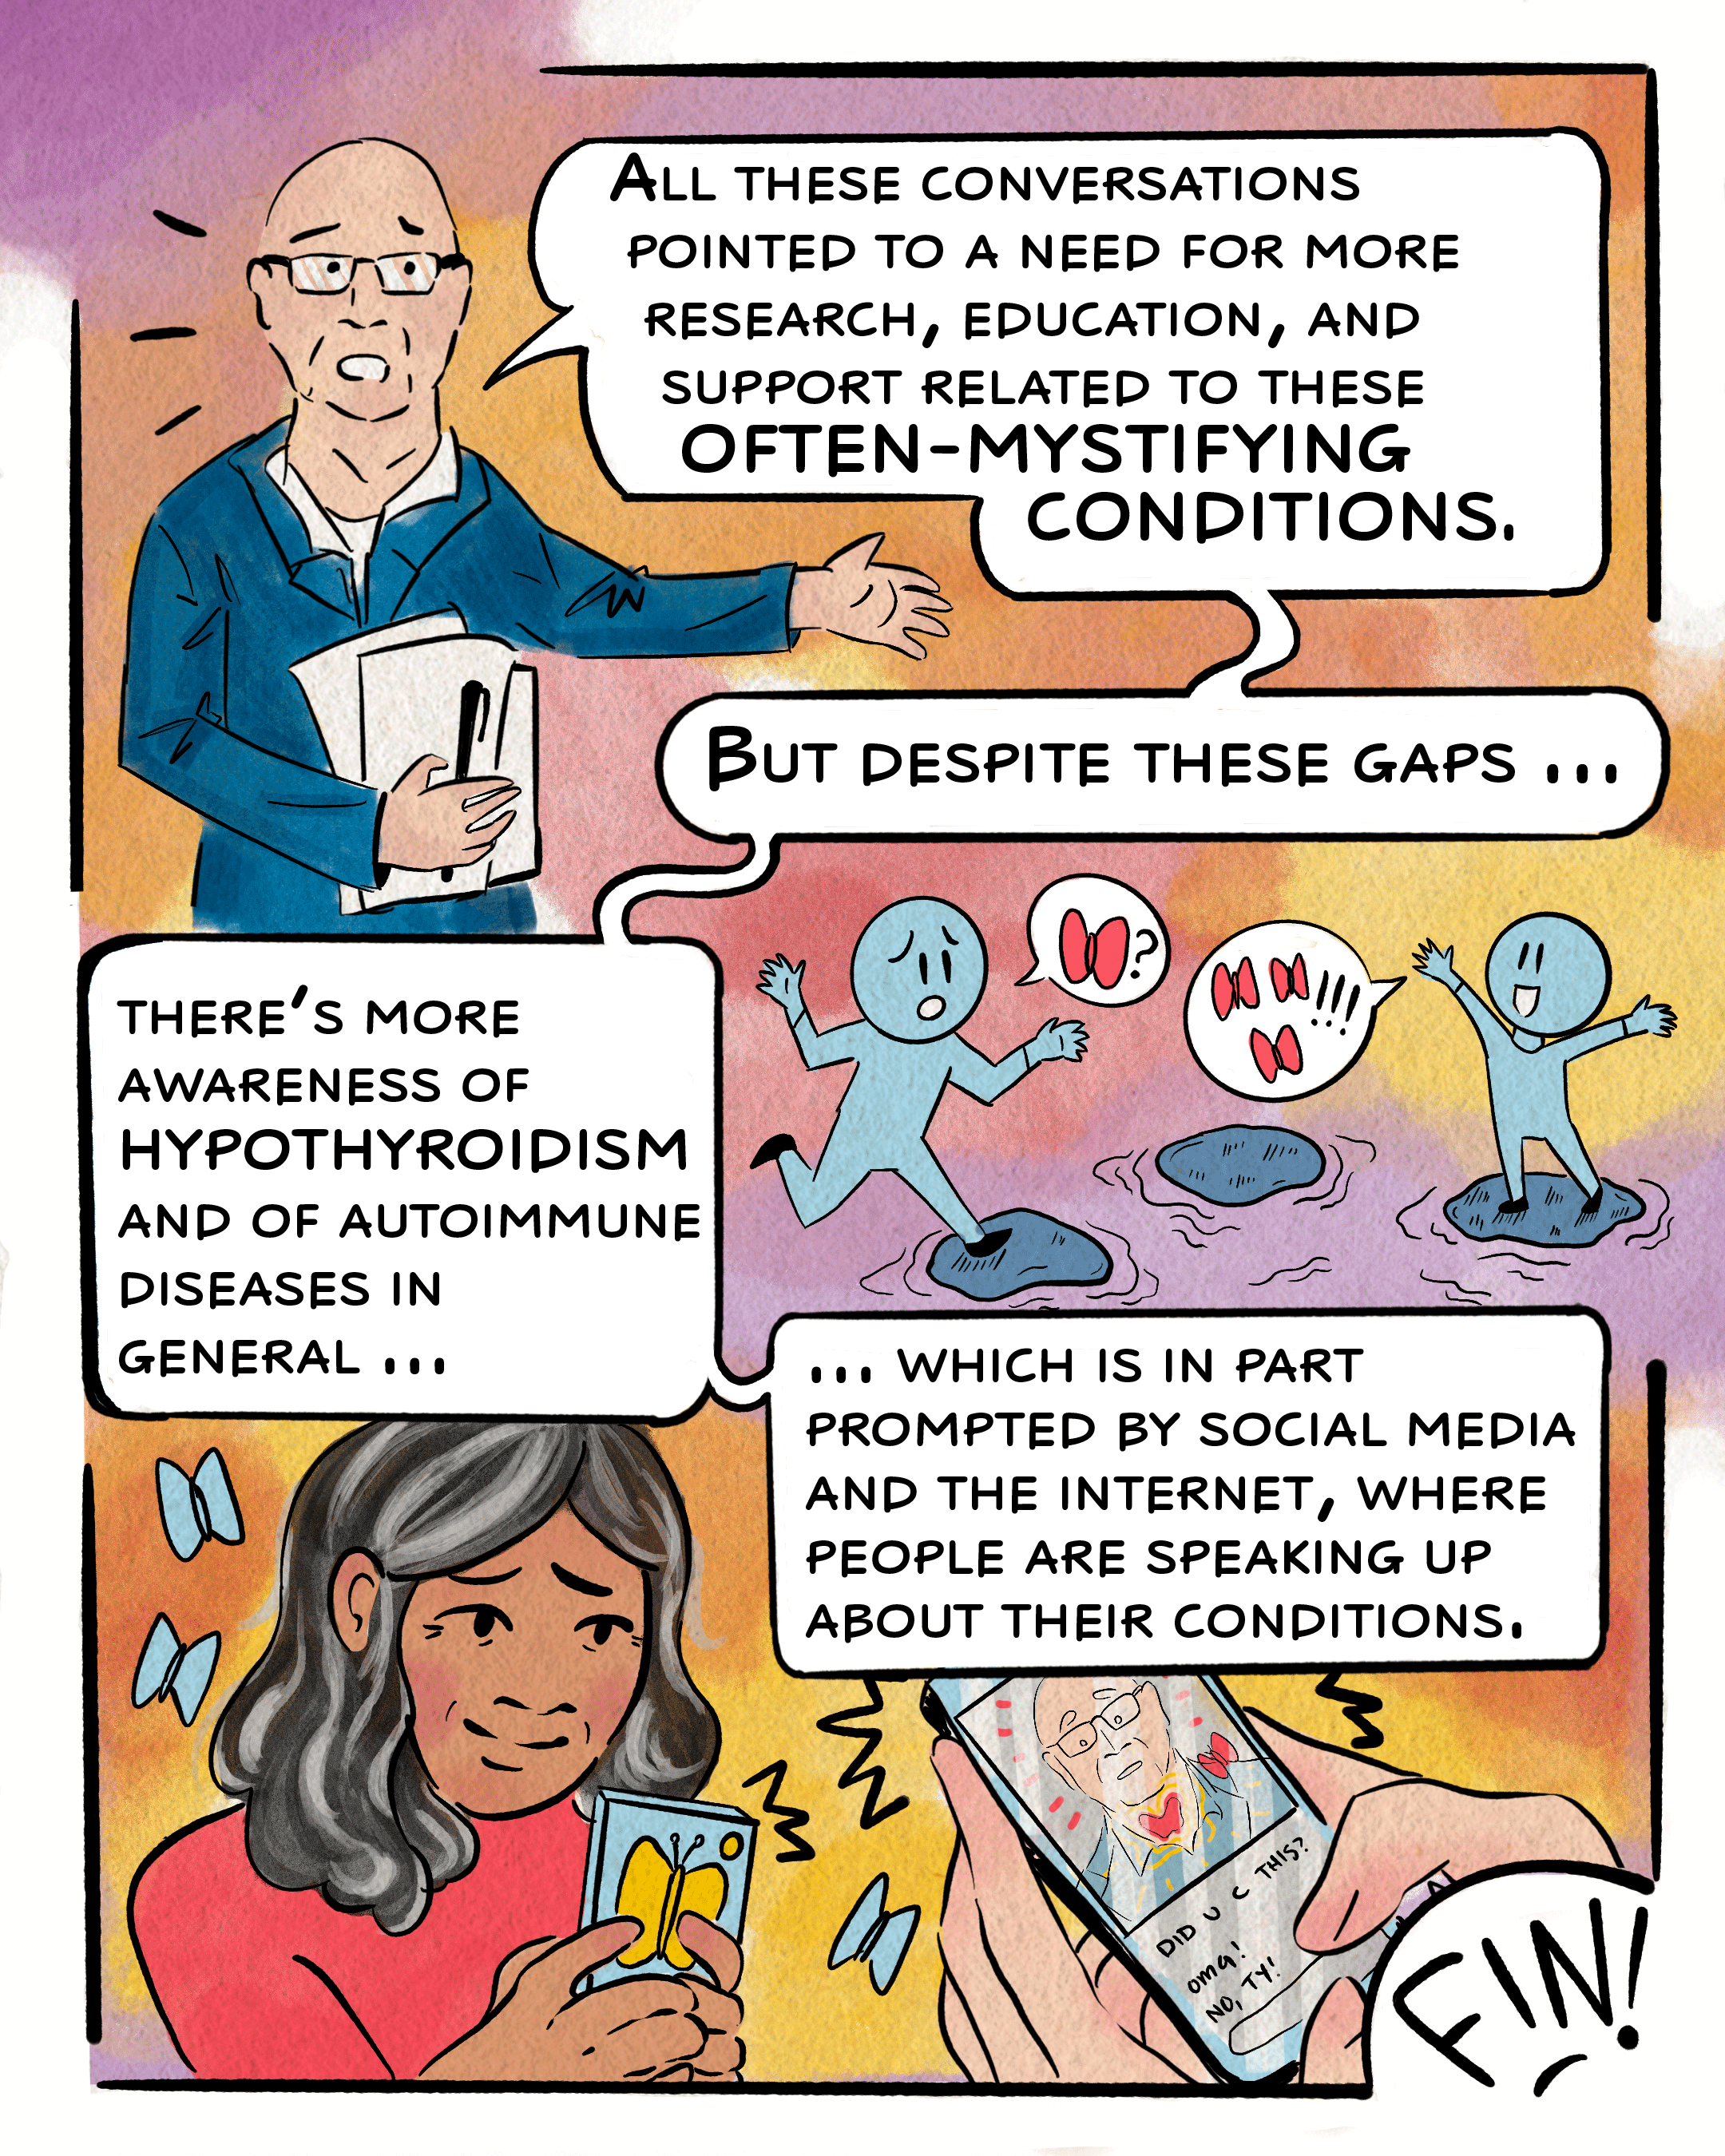 The final page of the comic starts with a drawing of Miller, who says, “all these conversations pointed to a need for more research, education, and support related to these often-mystifying conditions. But despite these gaps, there’s more awareness of hypothyroidism and of autoimmune diseases in general … which is in part prompted by social media and the internet, where people are speaking up about their conditions.” A drawing of two figures jumping over steppingstones is in the center panel, while two women exchange a text of this comic at the bottom of the page.